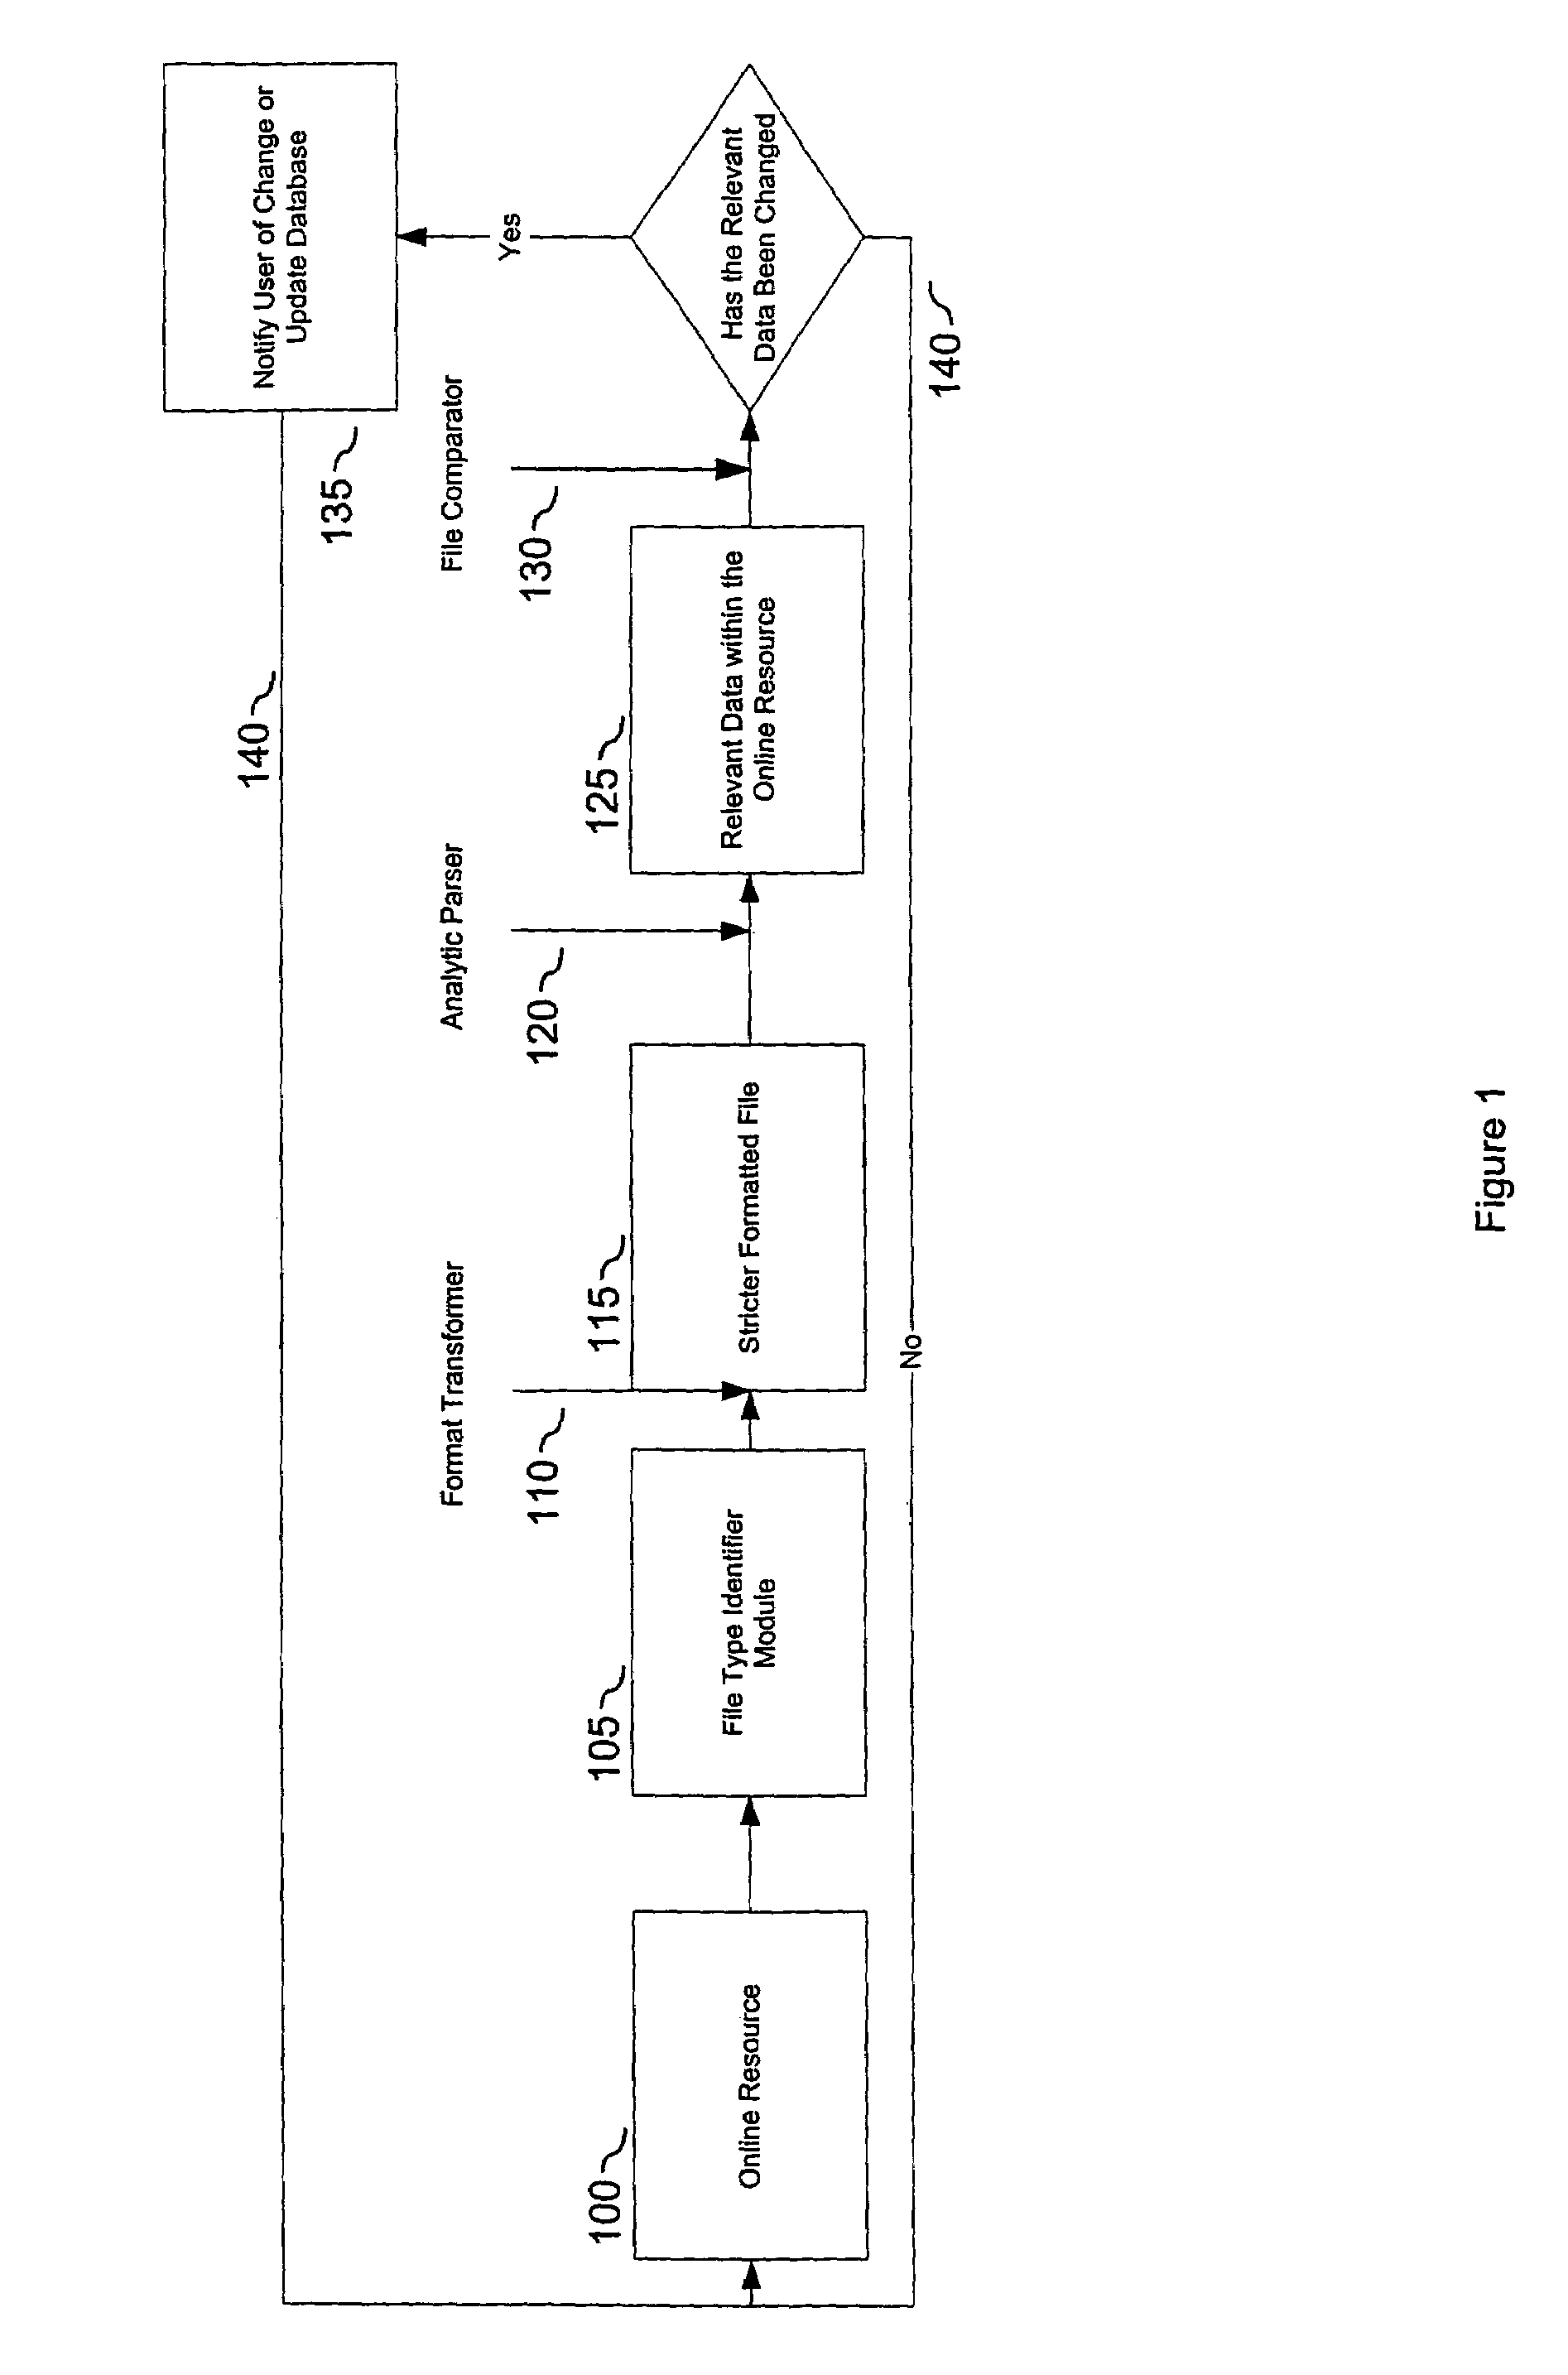 System and method for monitoring multiple online resources in different formats